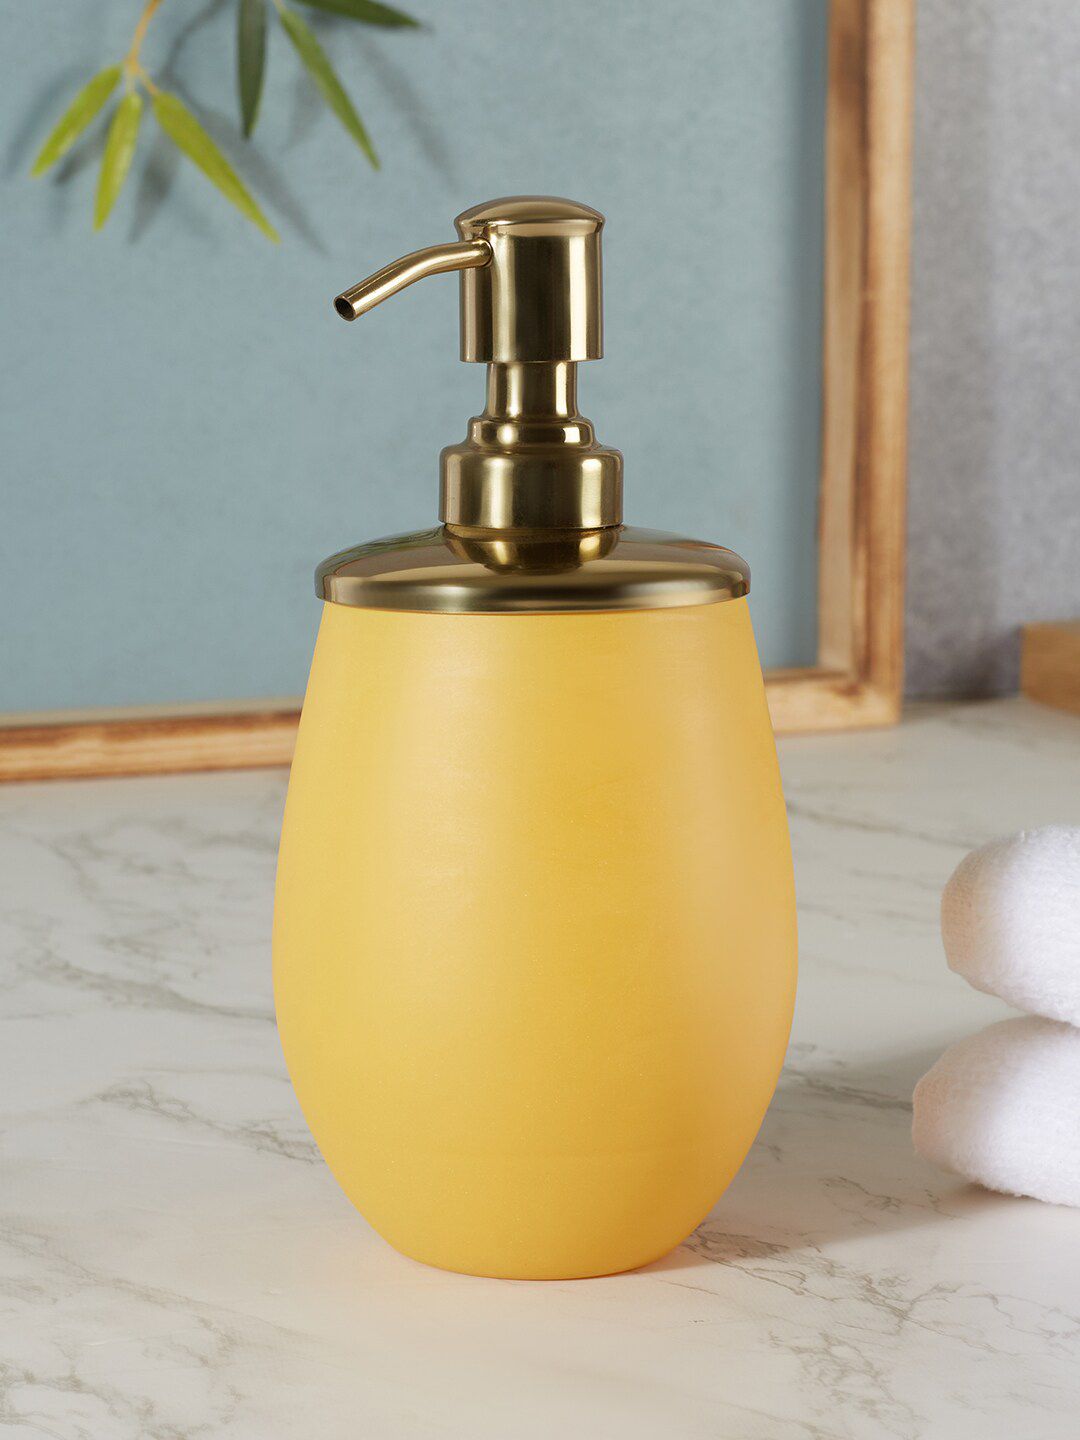 HomeTown Solid Glass Soap Dispenser Price in India